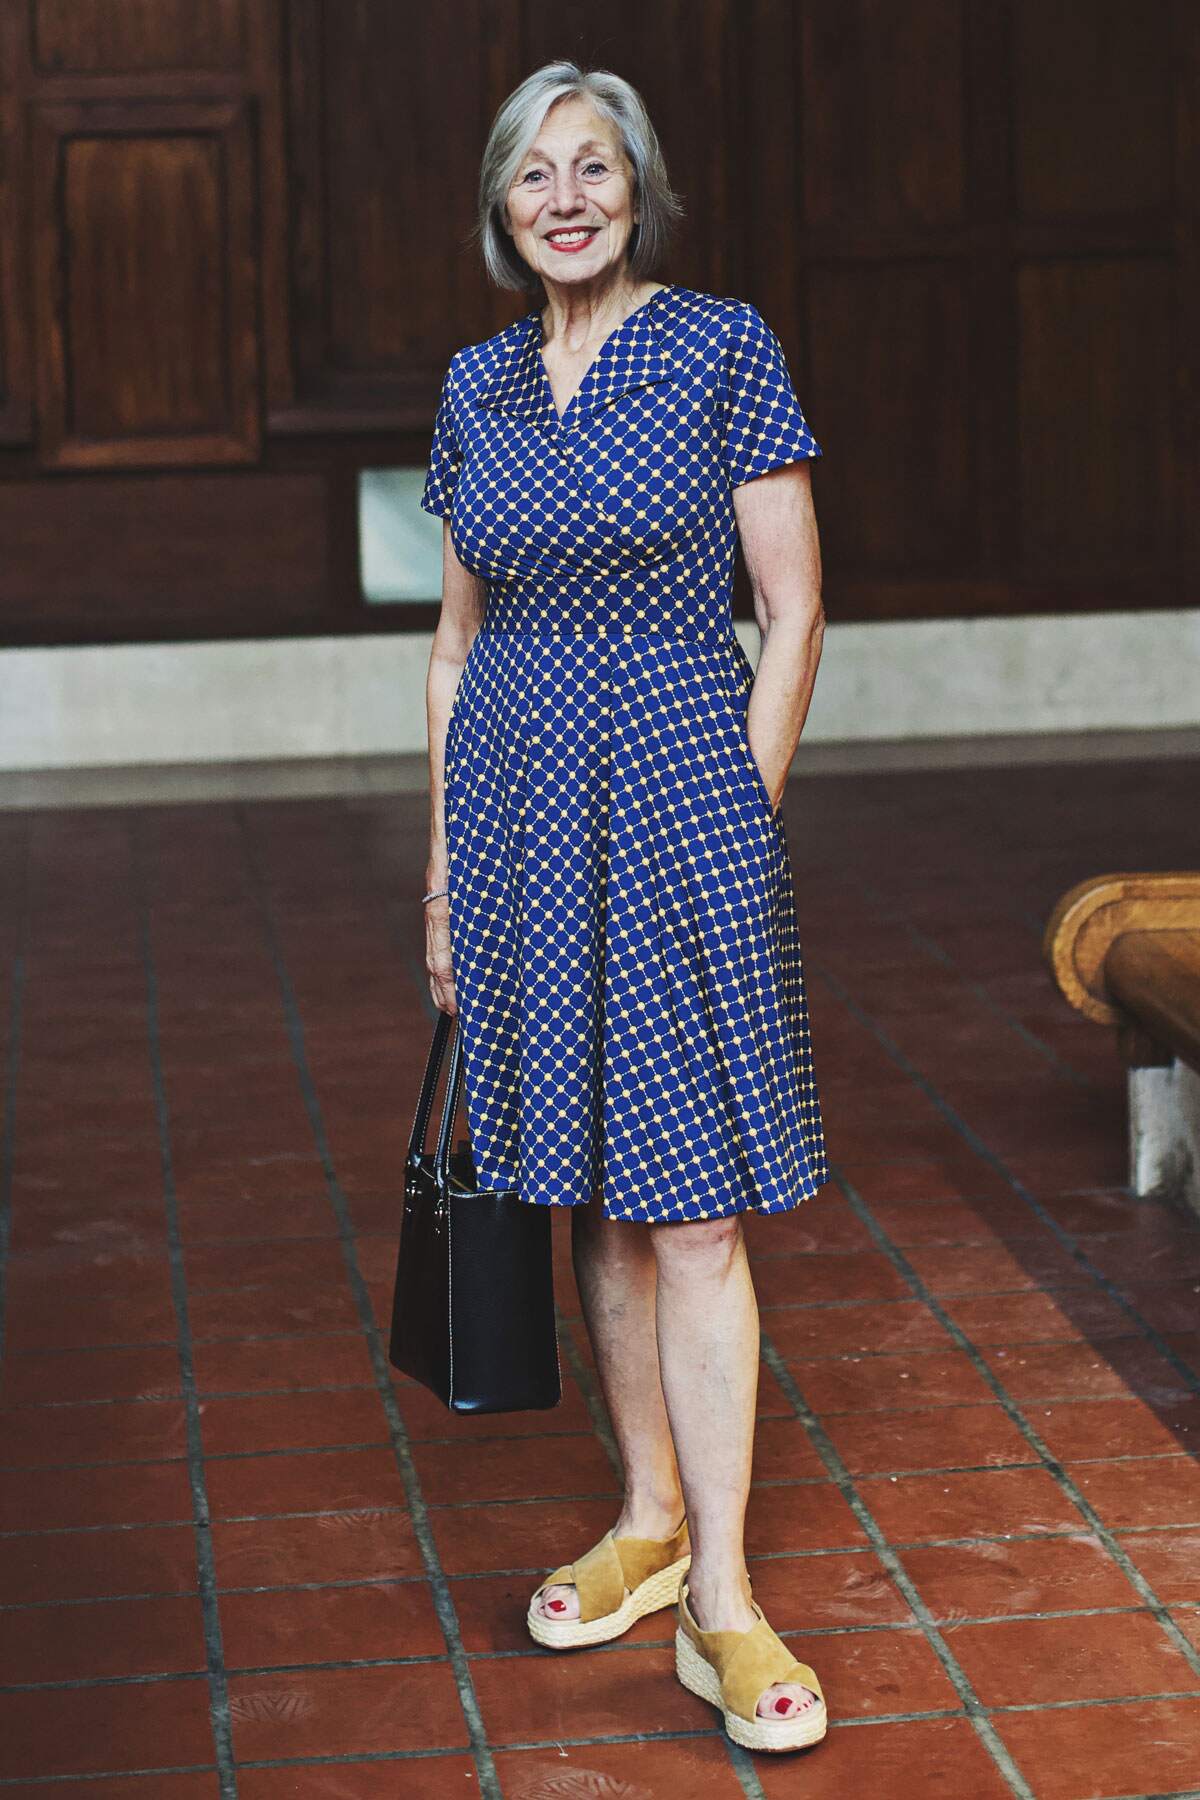 Peggy Dress in Navy with Gold Cross Dots by Karina Dresses